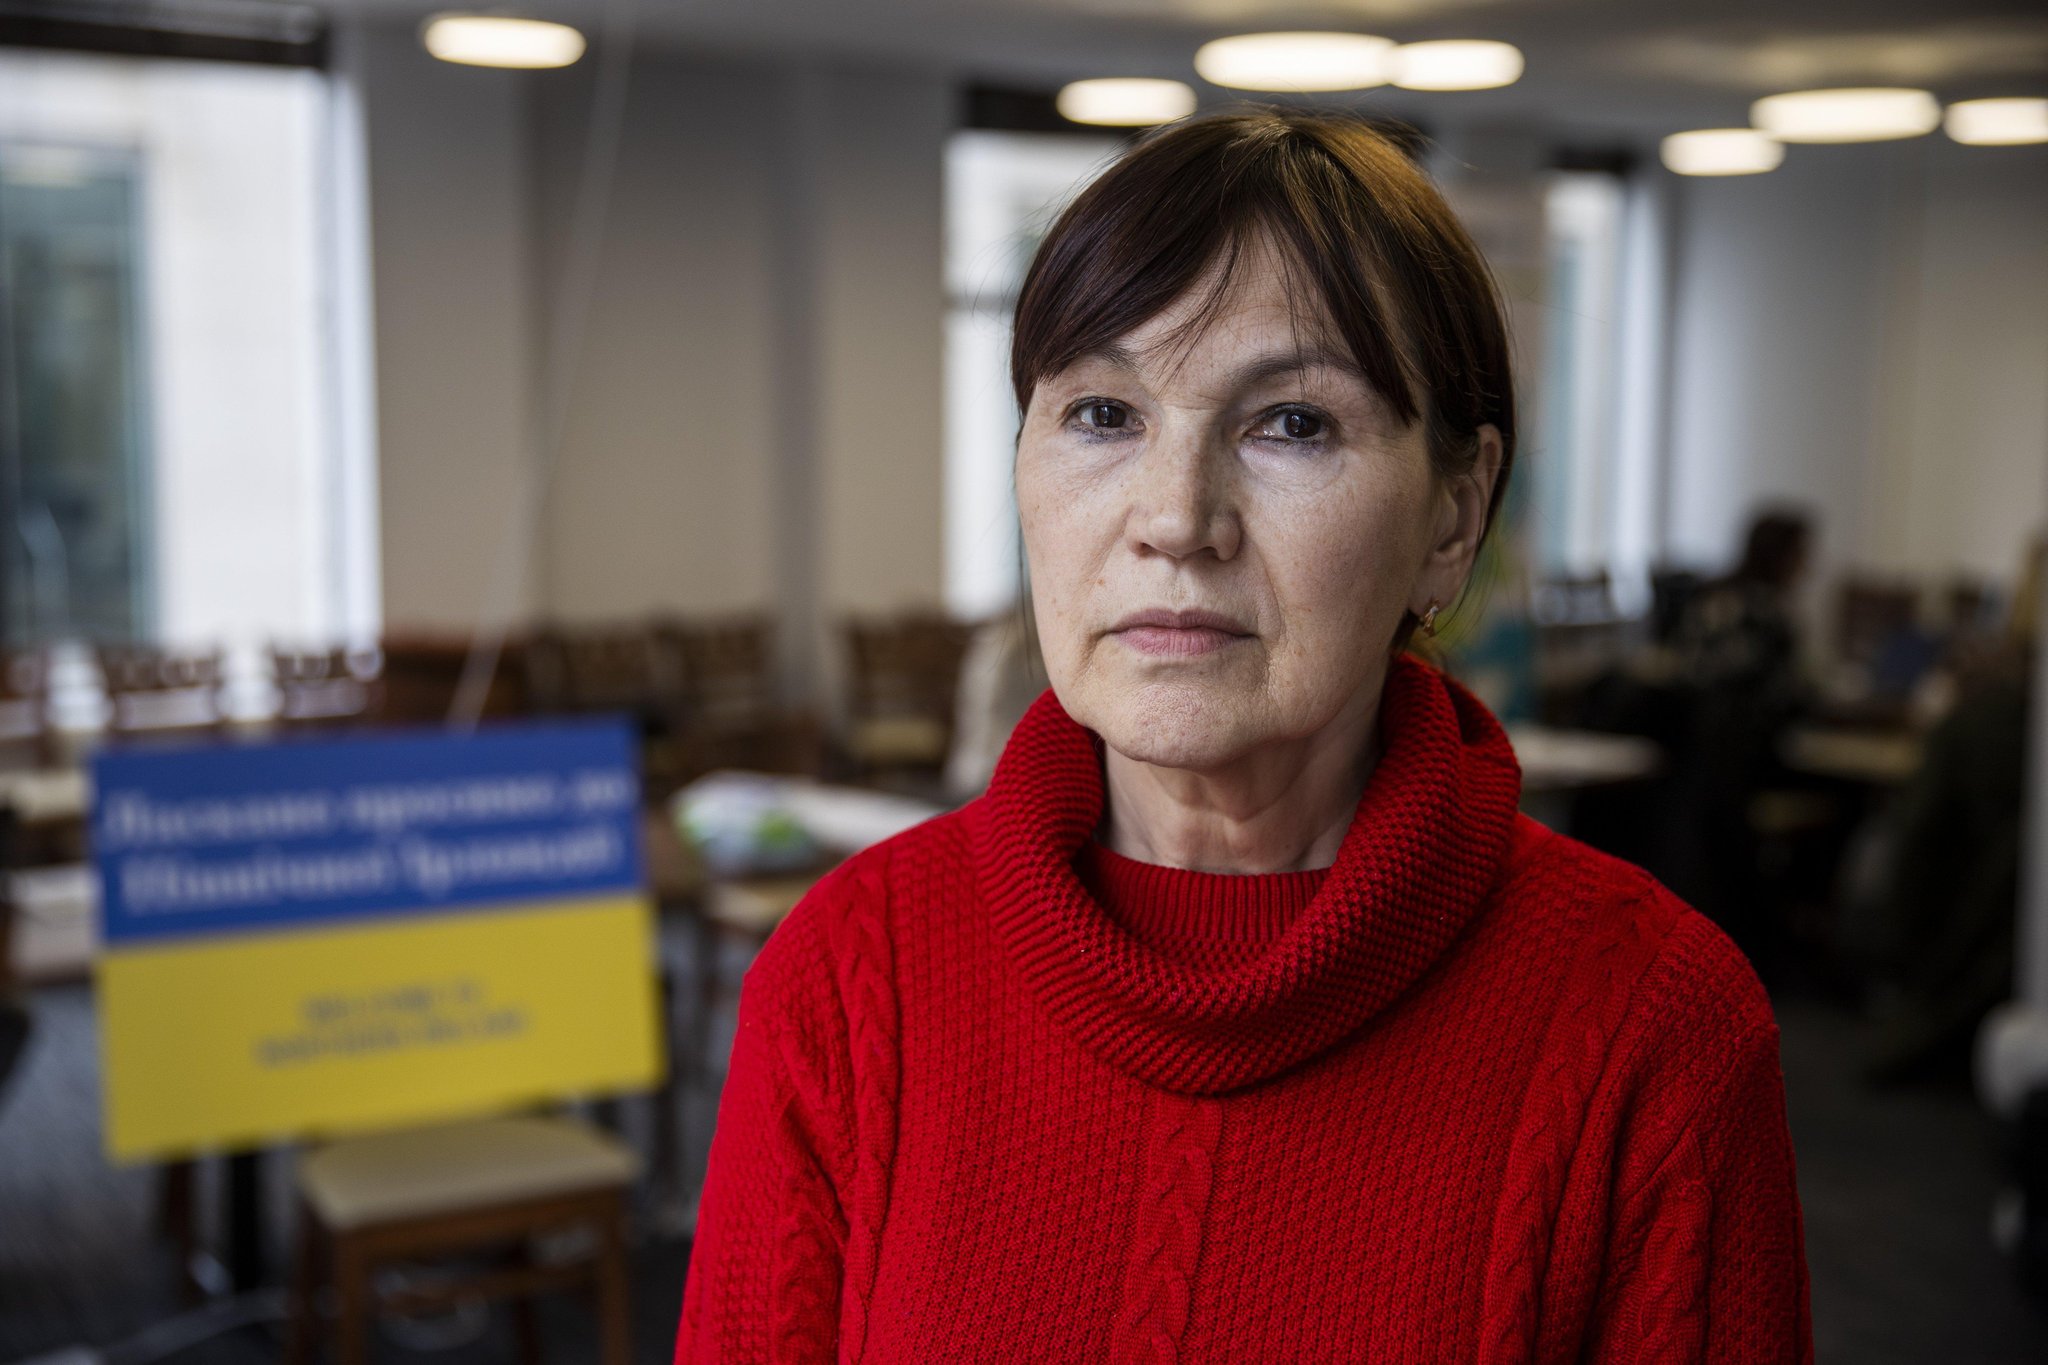 It's my duty to help: Ukrainian woman at refugee advice centre